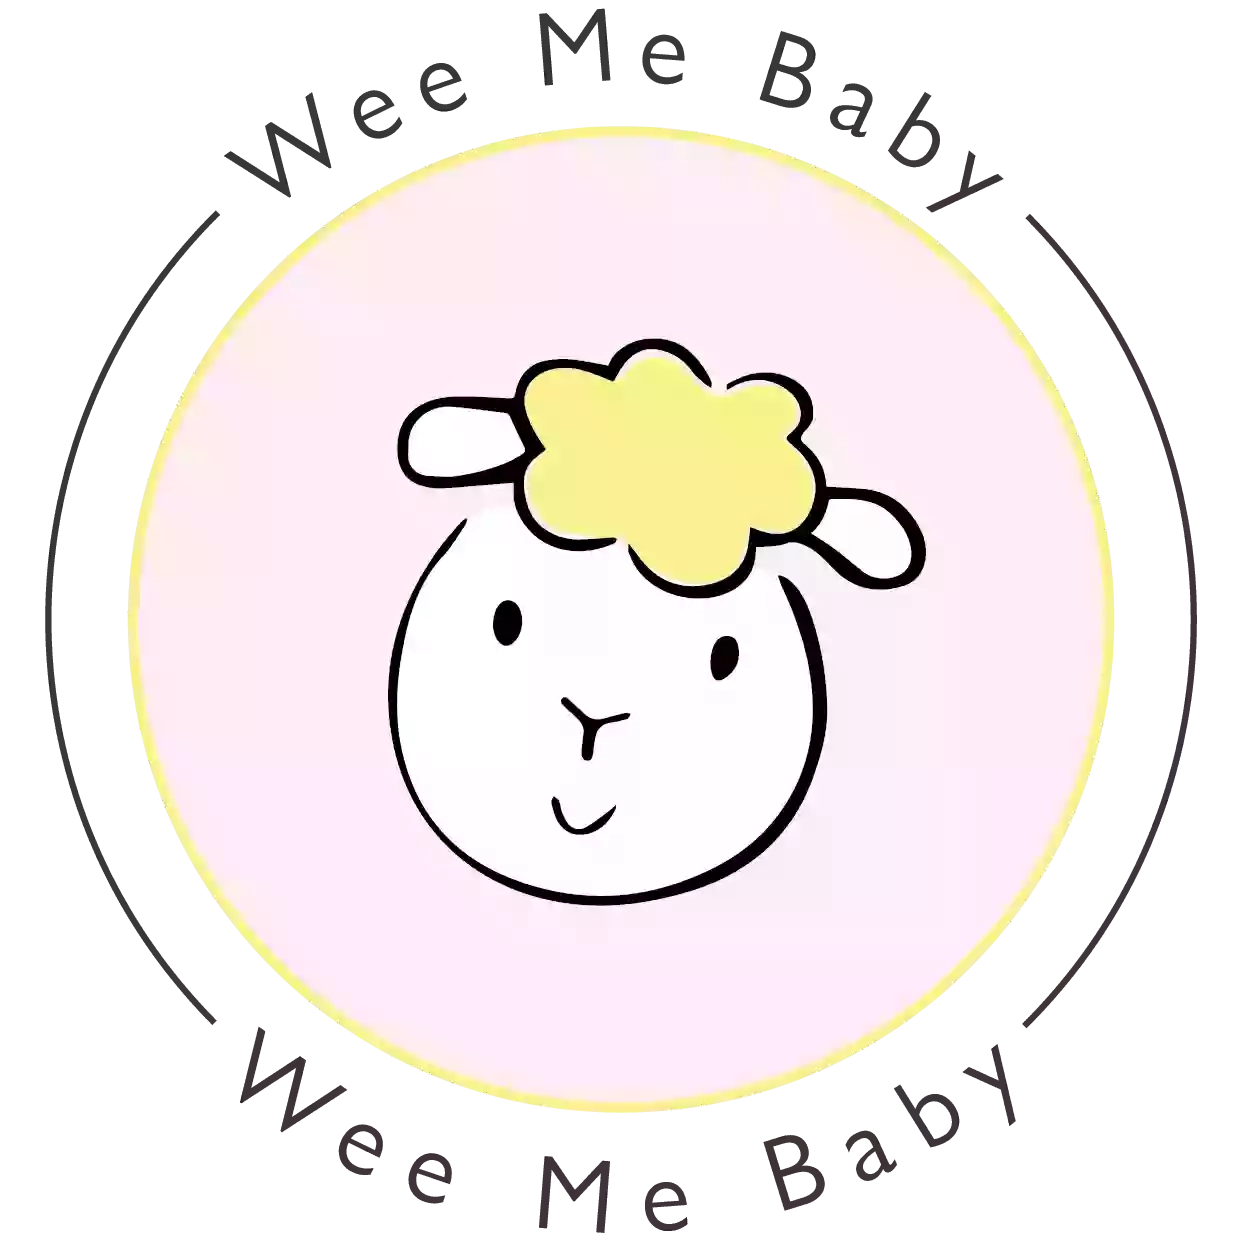 Wee Me Boutique